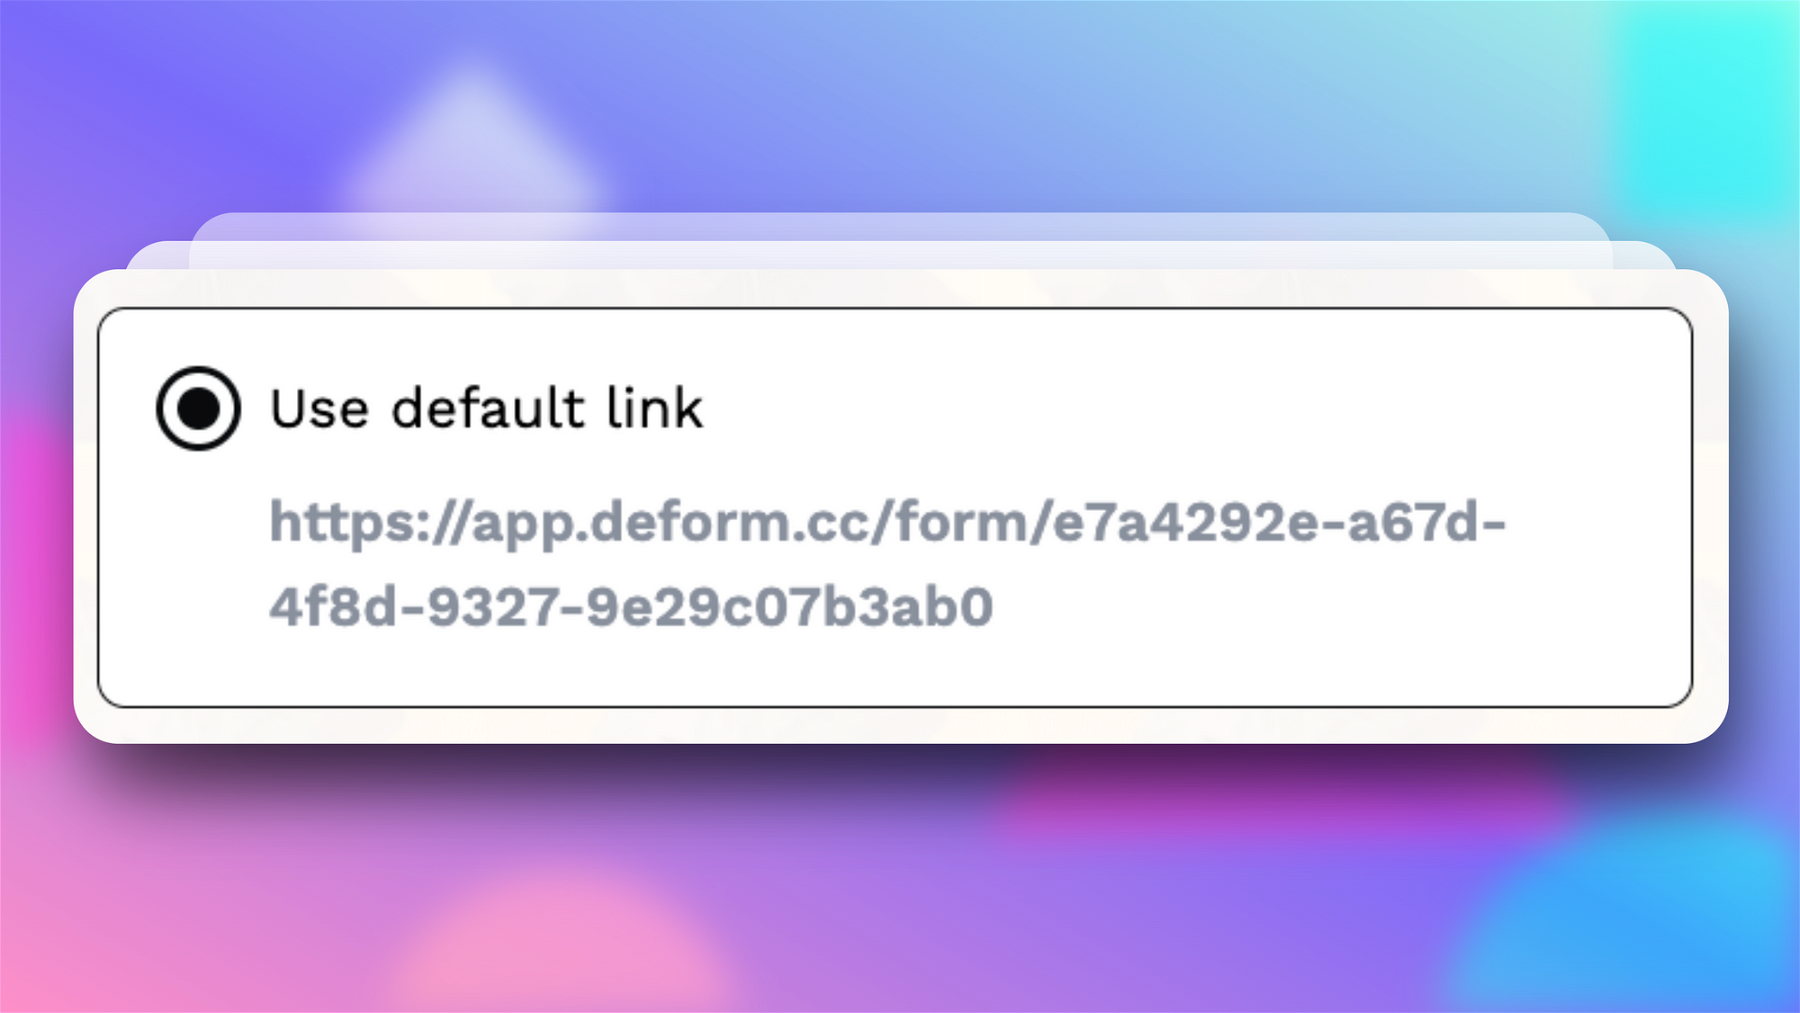 Example of what a default form link on DeForm looks like. By default, your link will look like a subpage with a hash (mixture of letters and numbers that create a unique identifier).